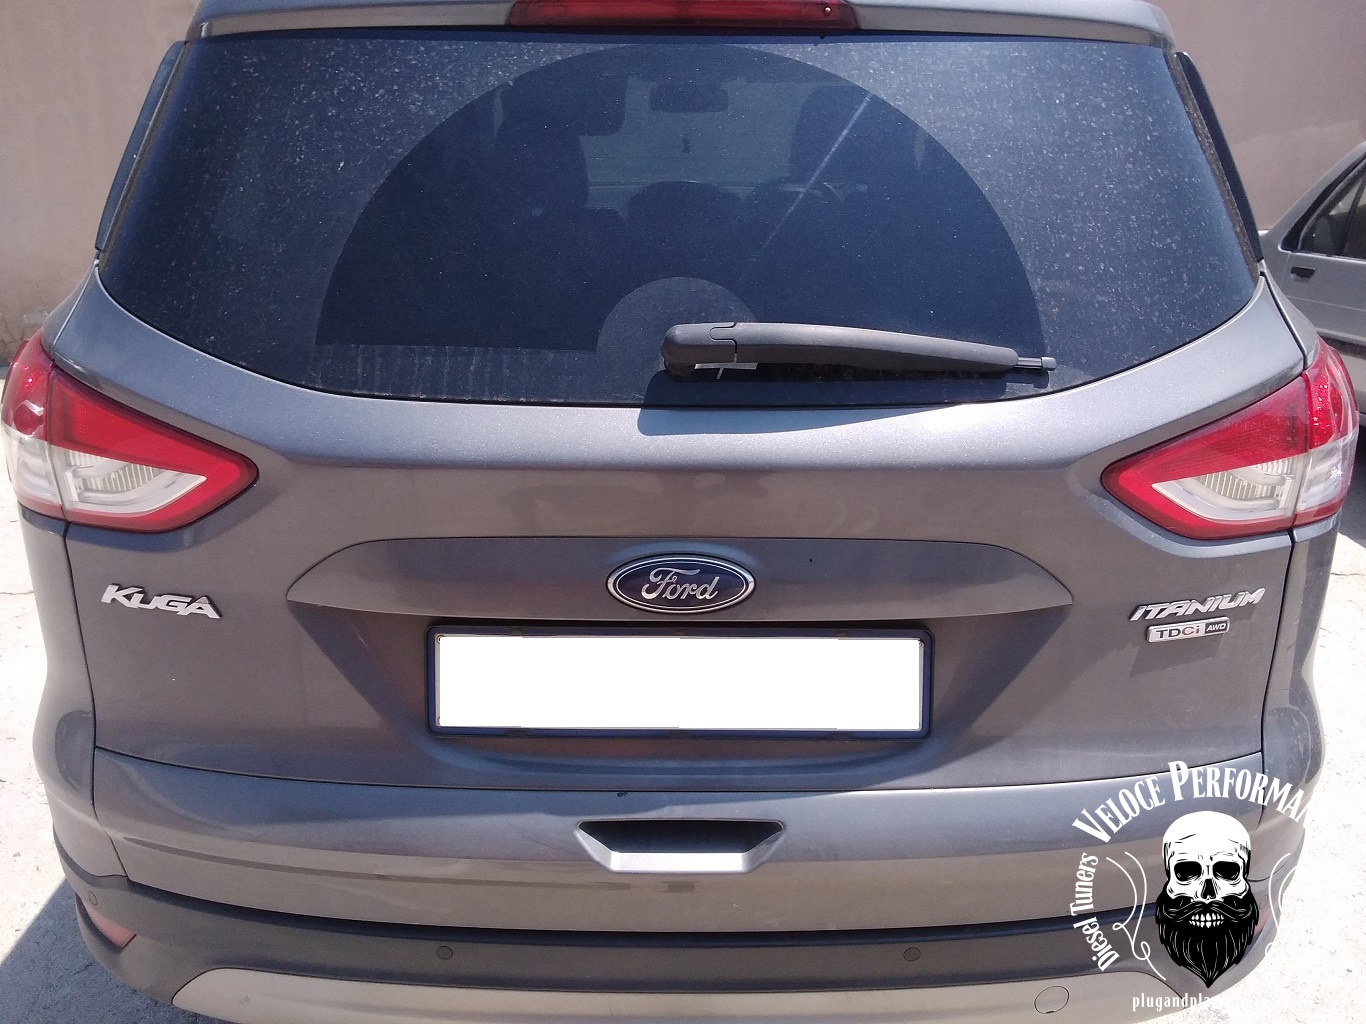 Ford Kuga 2.0 TDCi DPF Removal